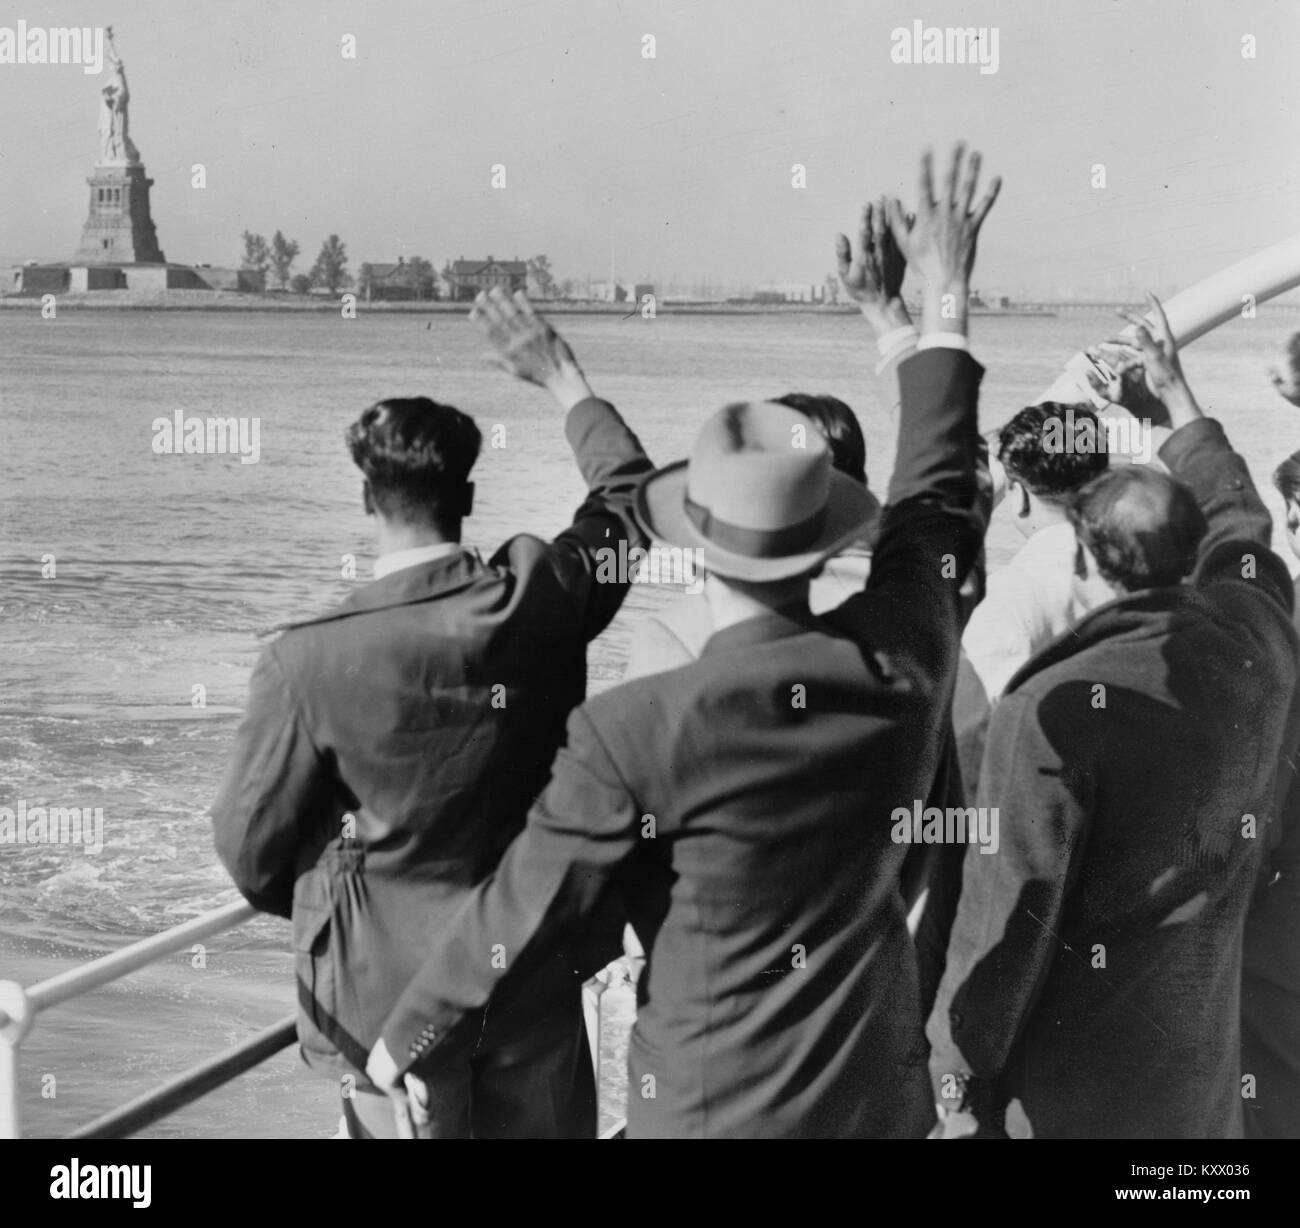 Deported Group Waves Goodbye to the Statue of Liberty Stock Photo